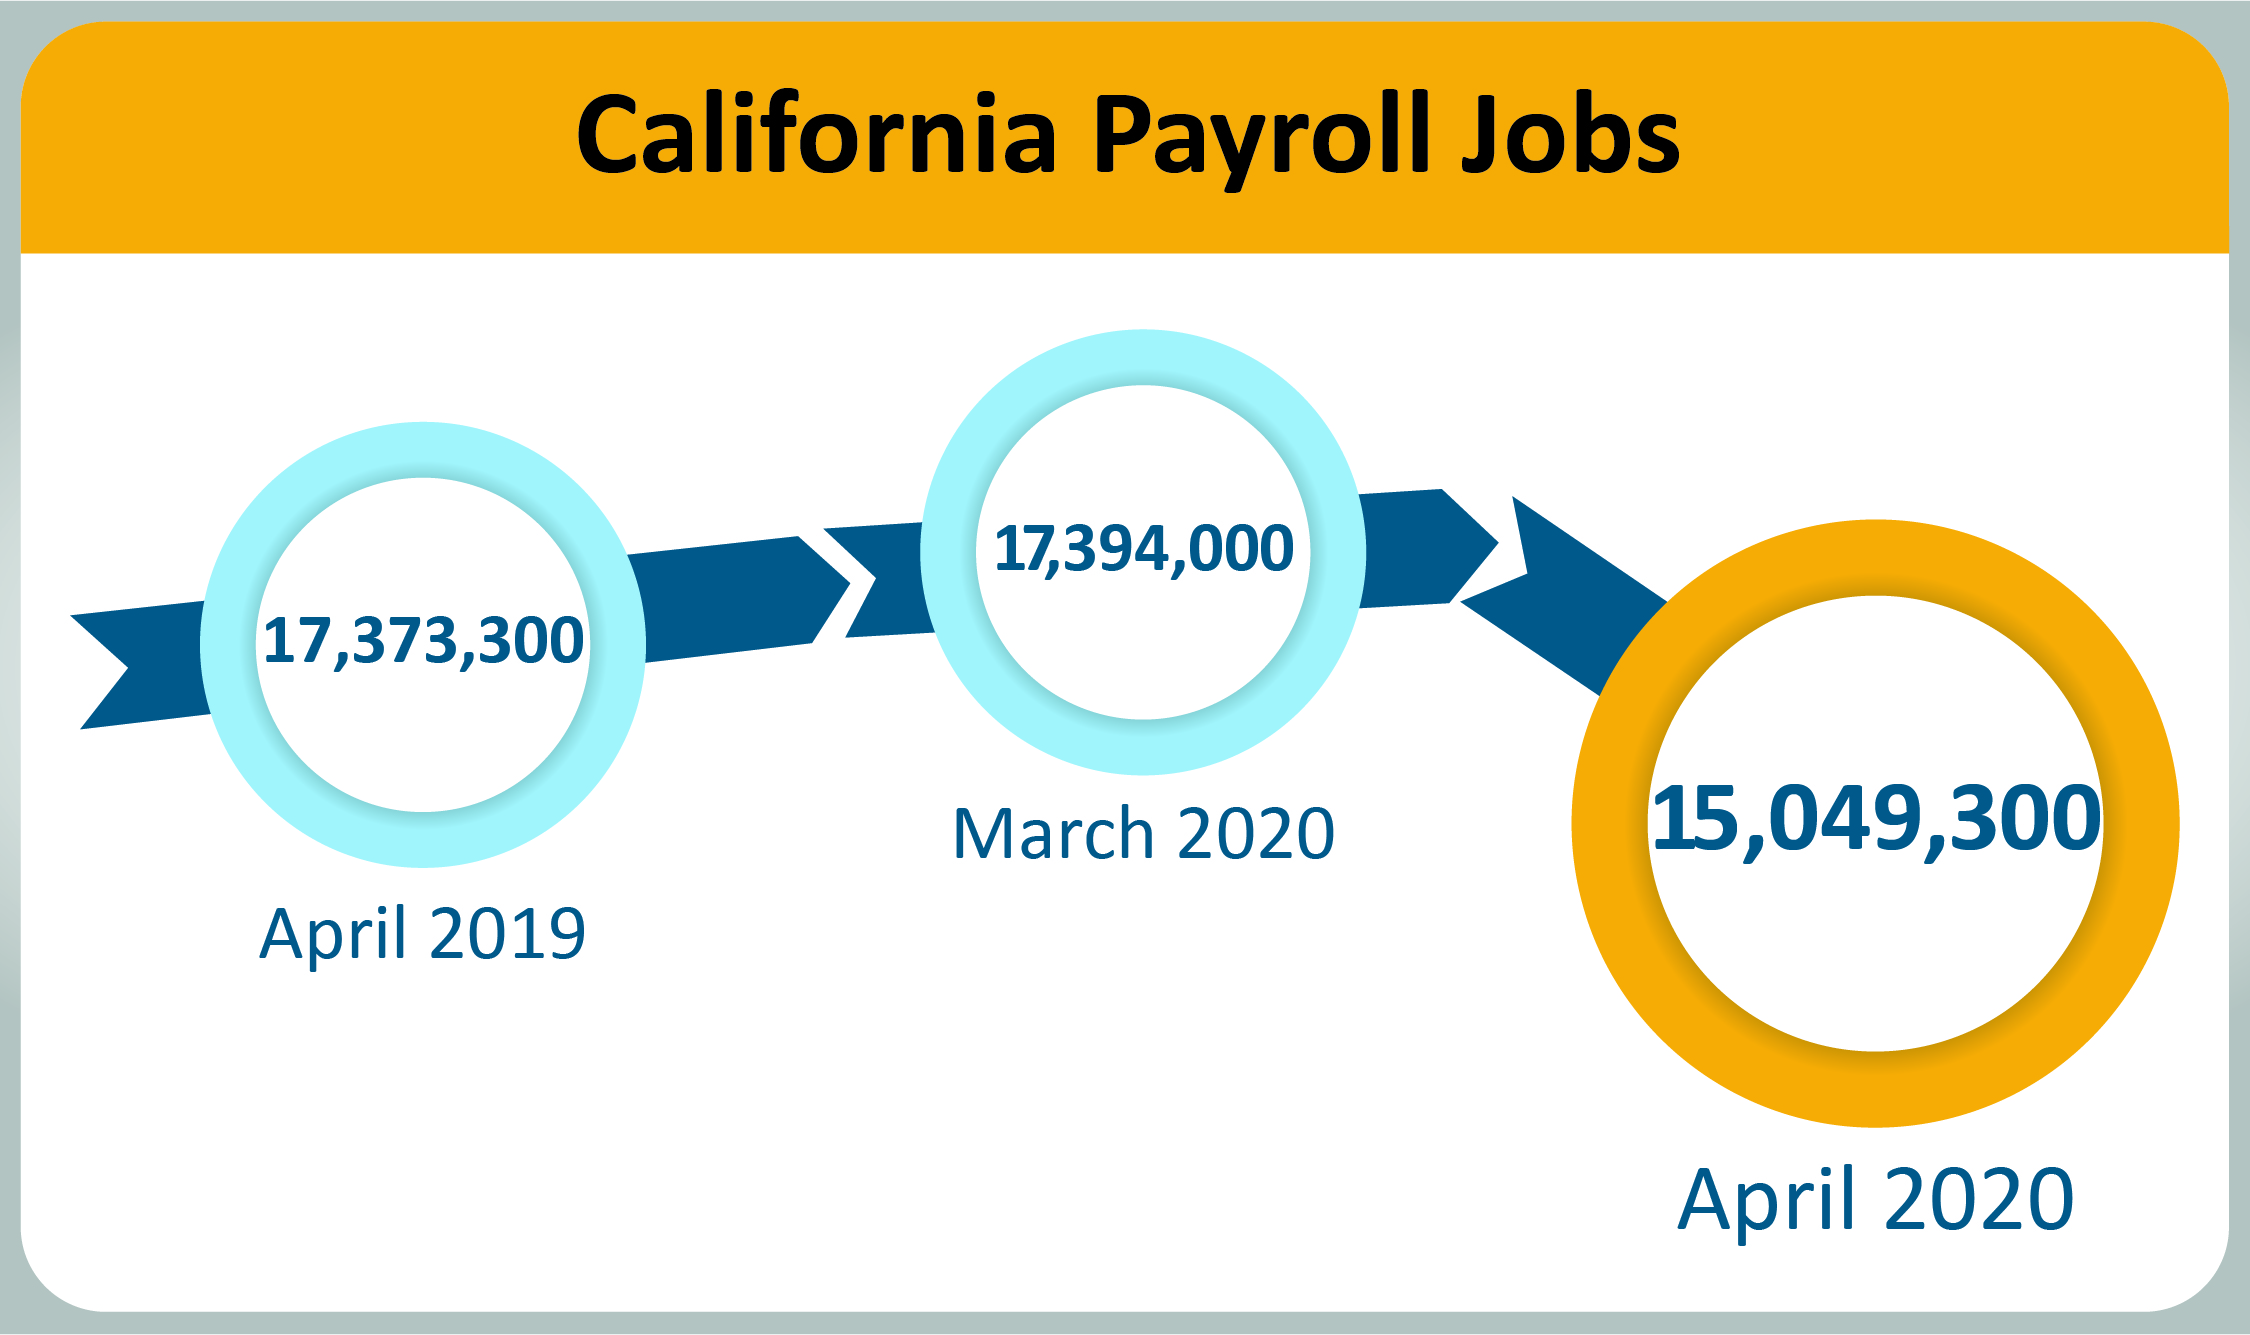 California payroll jobs totaled 15,049,300 in April 2020, down 2,344,700 from March 2020 and down 2,324,000 from April of last year.